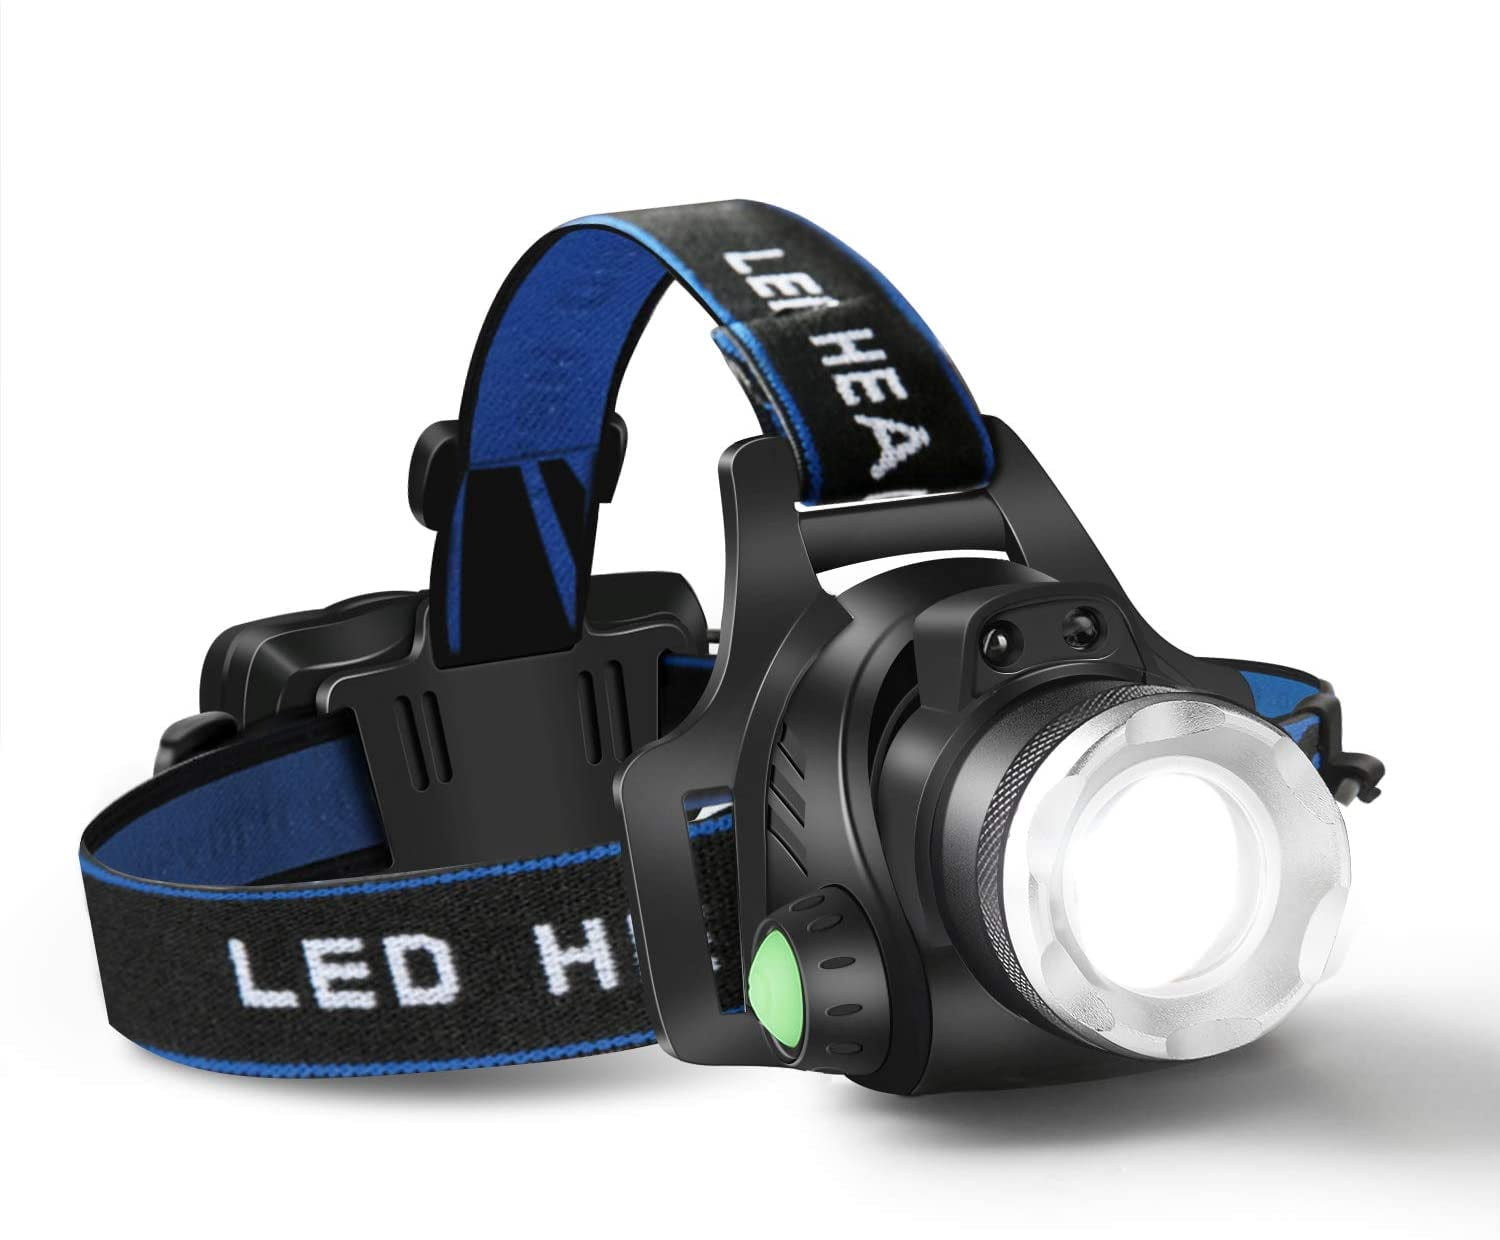 Zoom Headlamp Rechargeable T6 LED Headlight Flashlights Head Torch Fish 60000LM